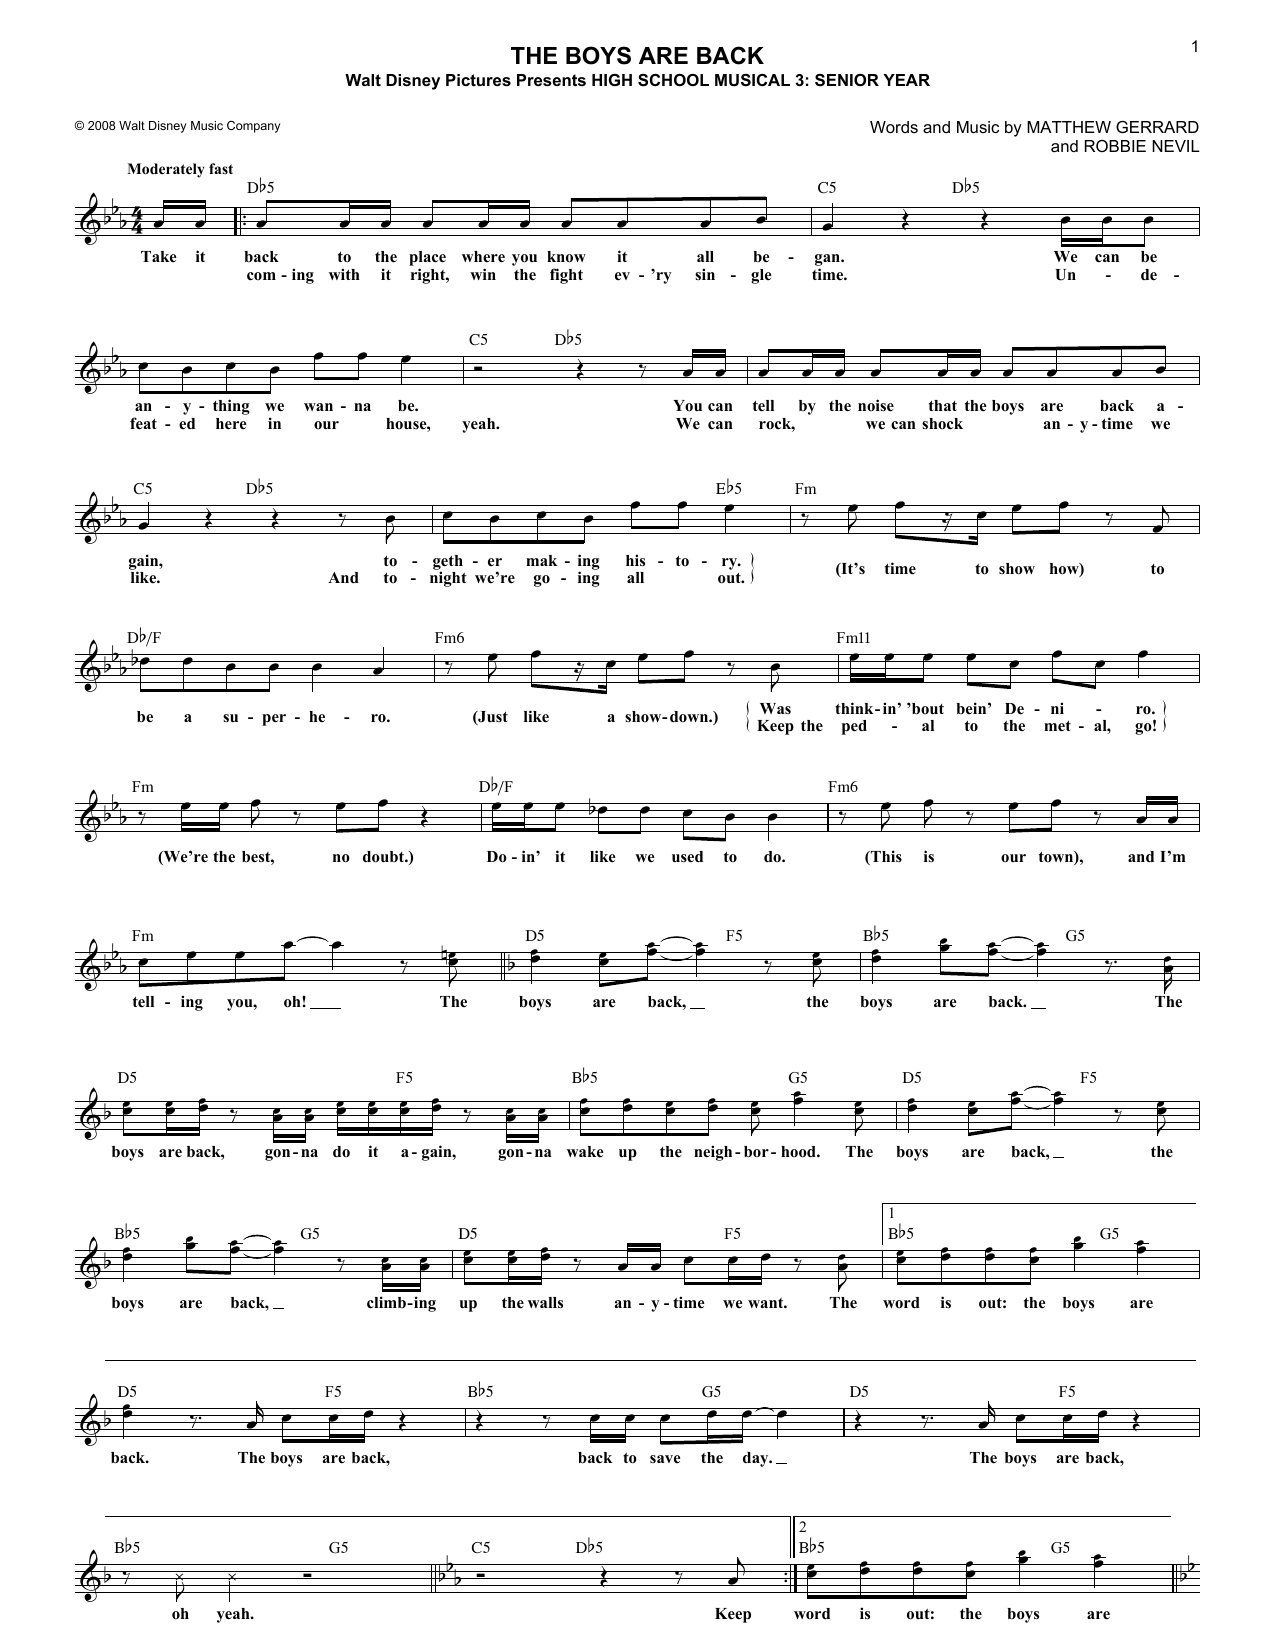 Robbie Nevil The Boys Are Back sheet music notes and chords. Download Printable PDF.